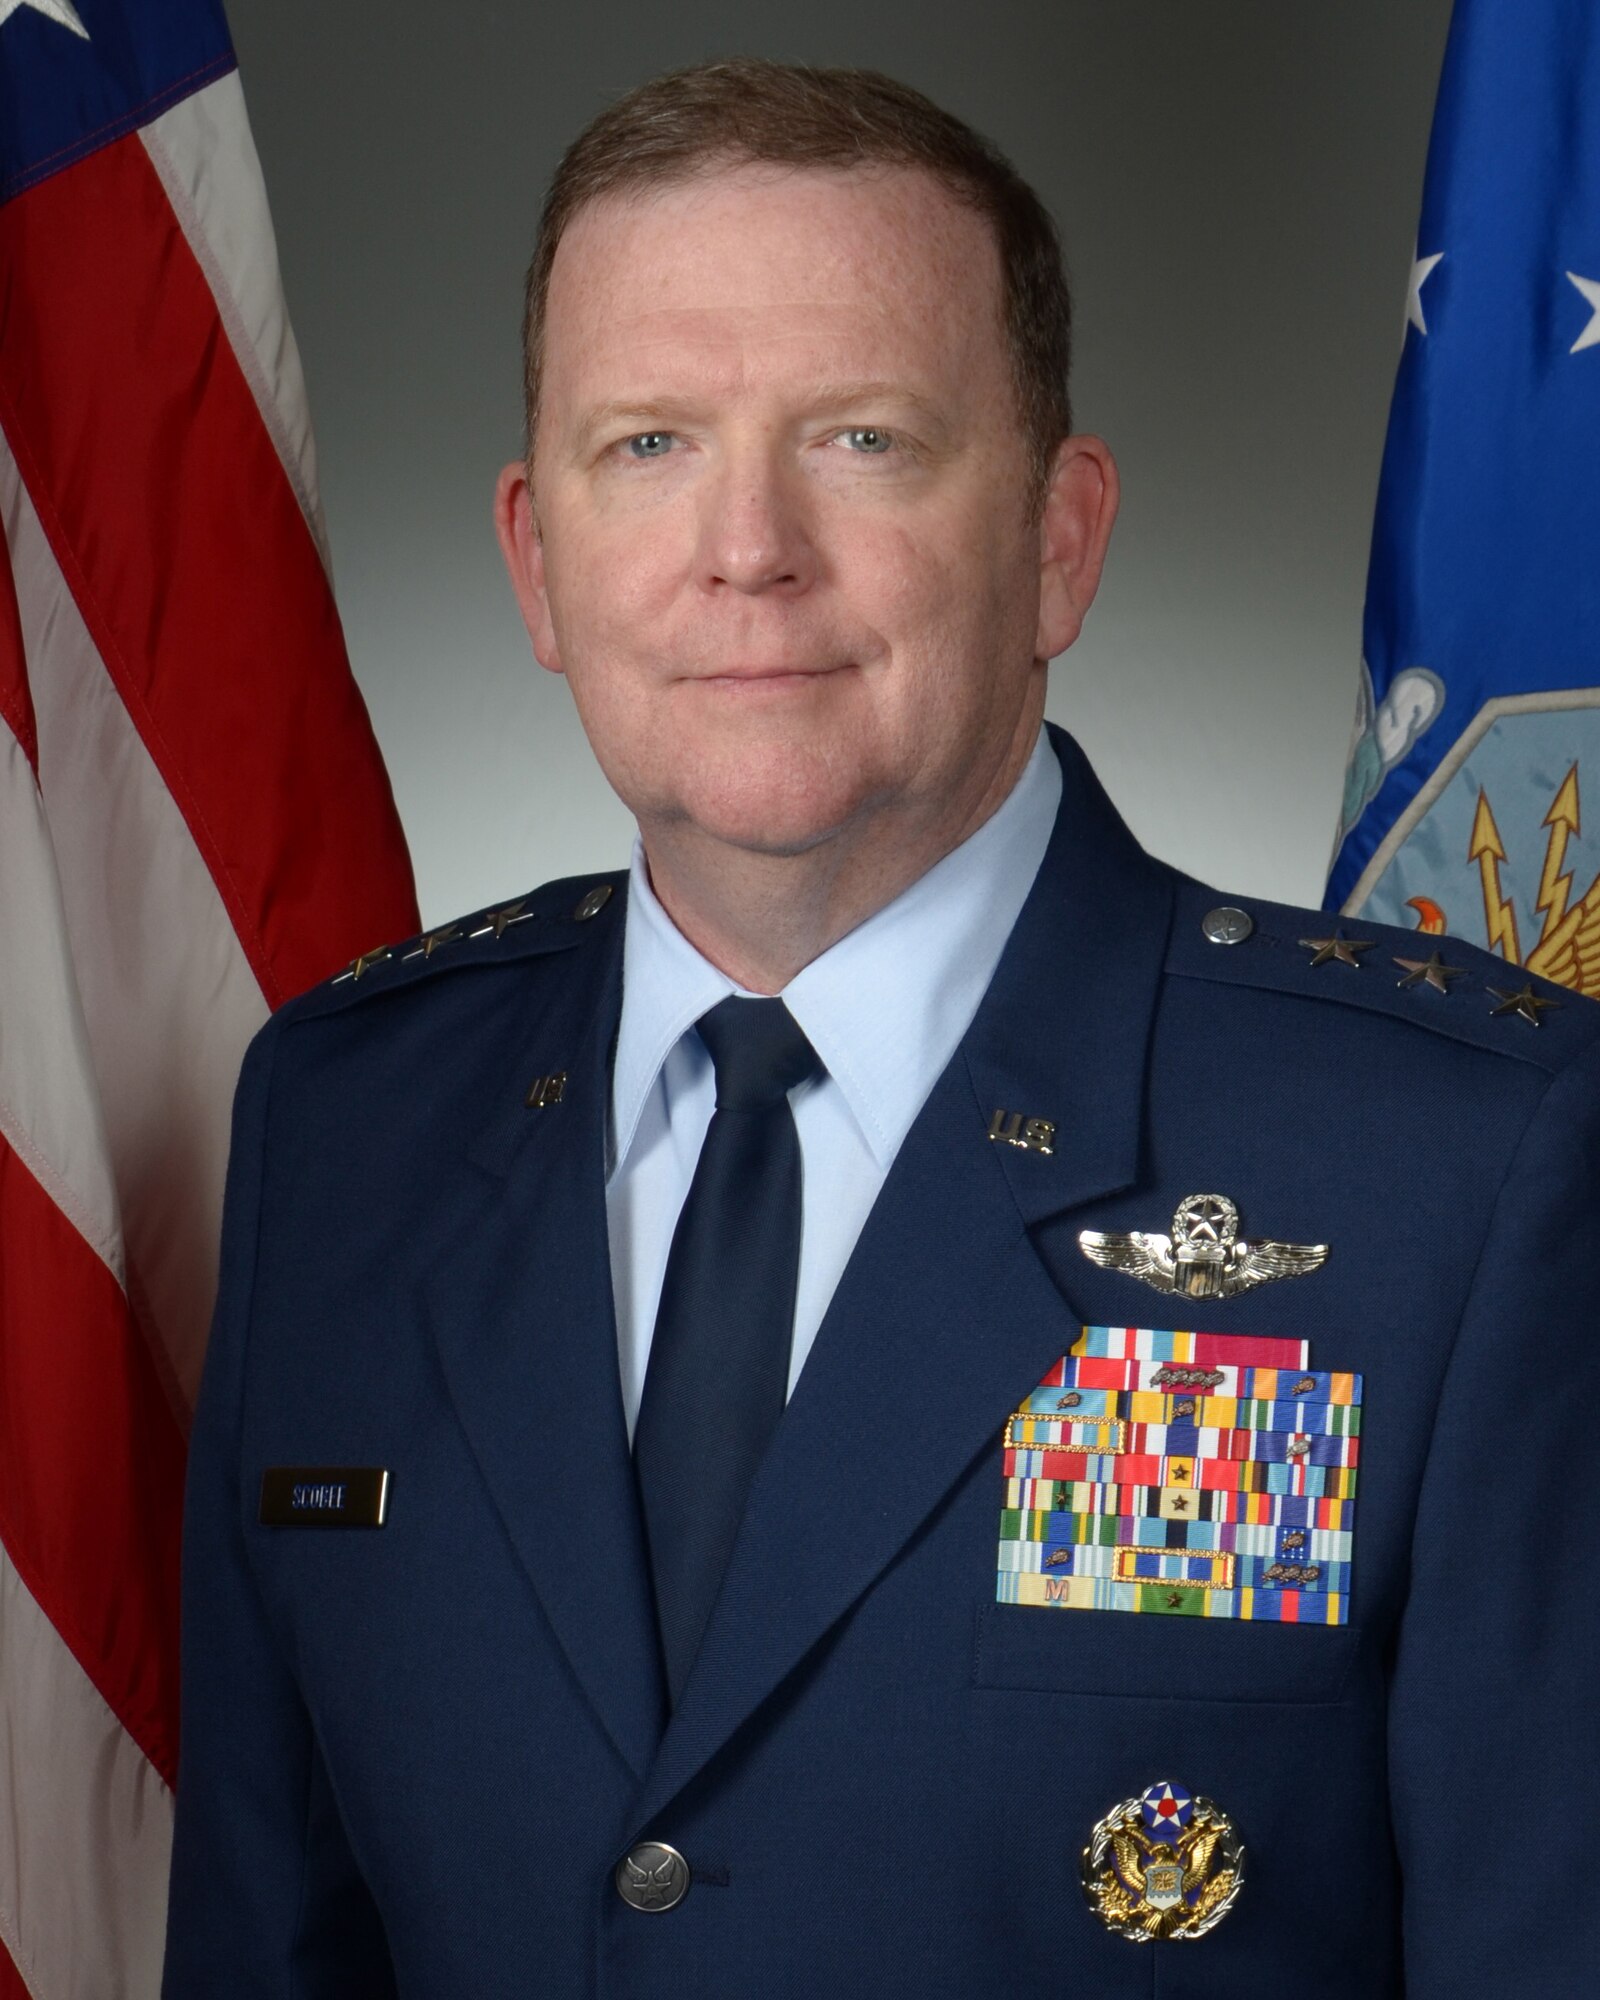 Lt. Gen. Richard W. Scobee is the Chief of Air Force Reserve, Headquarters U.S. Air Force, Washington, D.C., and Commander, Air Force Reserve Command, Robins Air Force Base, Georgia. As Chief of Air Force Reserve, he serves as principal adviser on reserve matters to the Secretary of the Air Force and the Air Force Chief of Staff. As Commander of Air Force Reserve Command, he has full responsibility for the supervision of all U.S. Air Force Reserve units around the world.